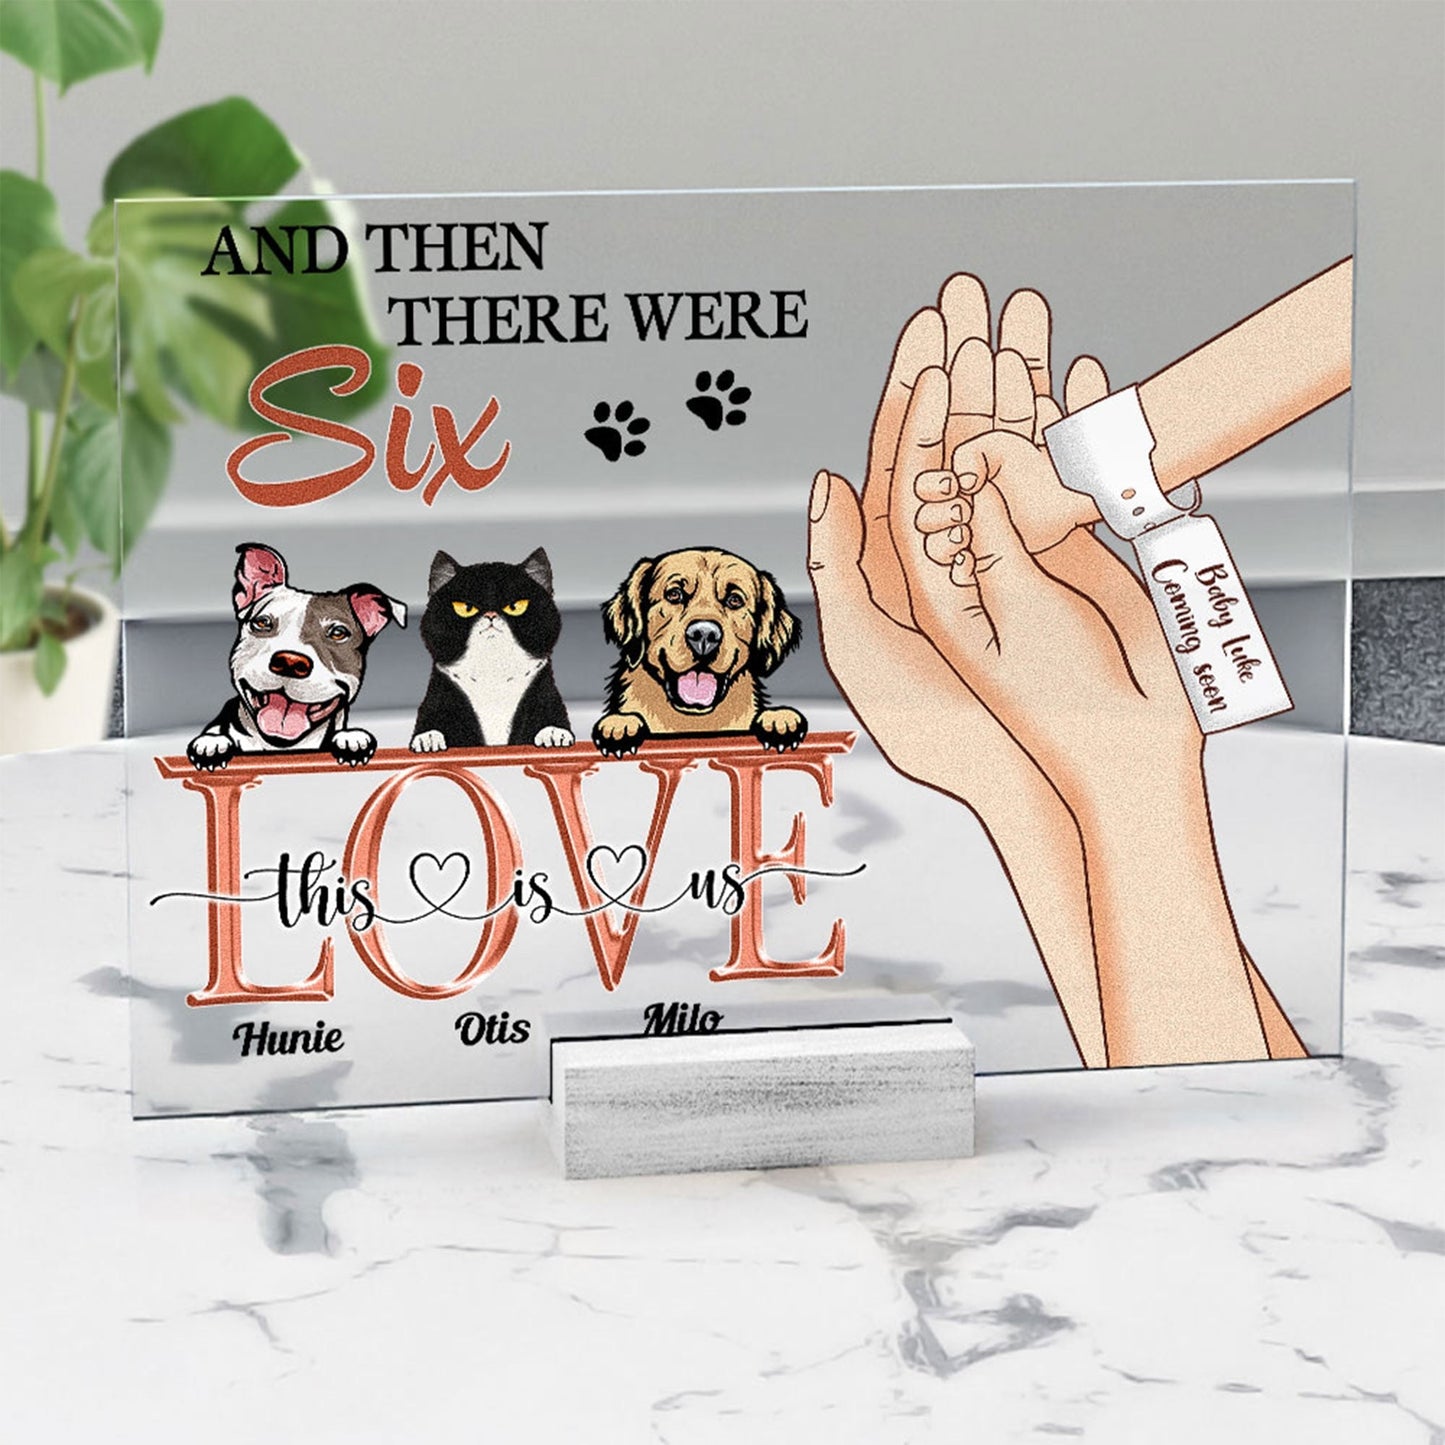 And Then There Were Six - Personalized Acrylic Plaque - Pregnancy Announcement, Father's Day, Newborn Baby Gift For Family, Husband & Wife, Dog & Cat Lovers